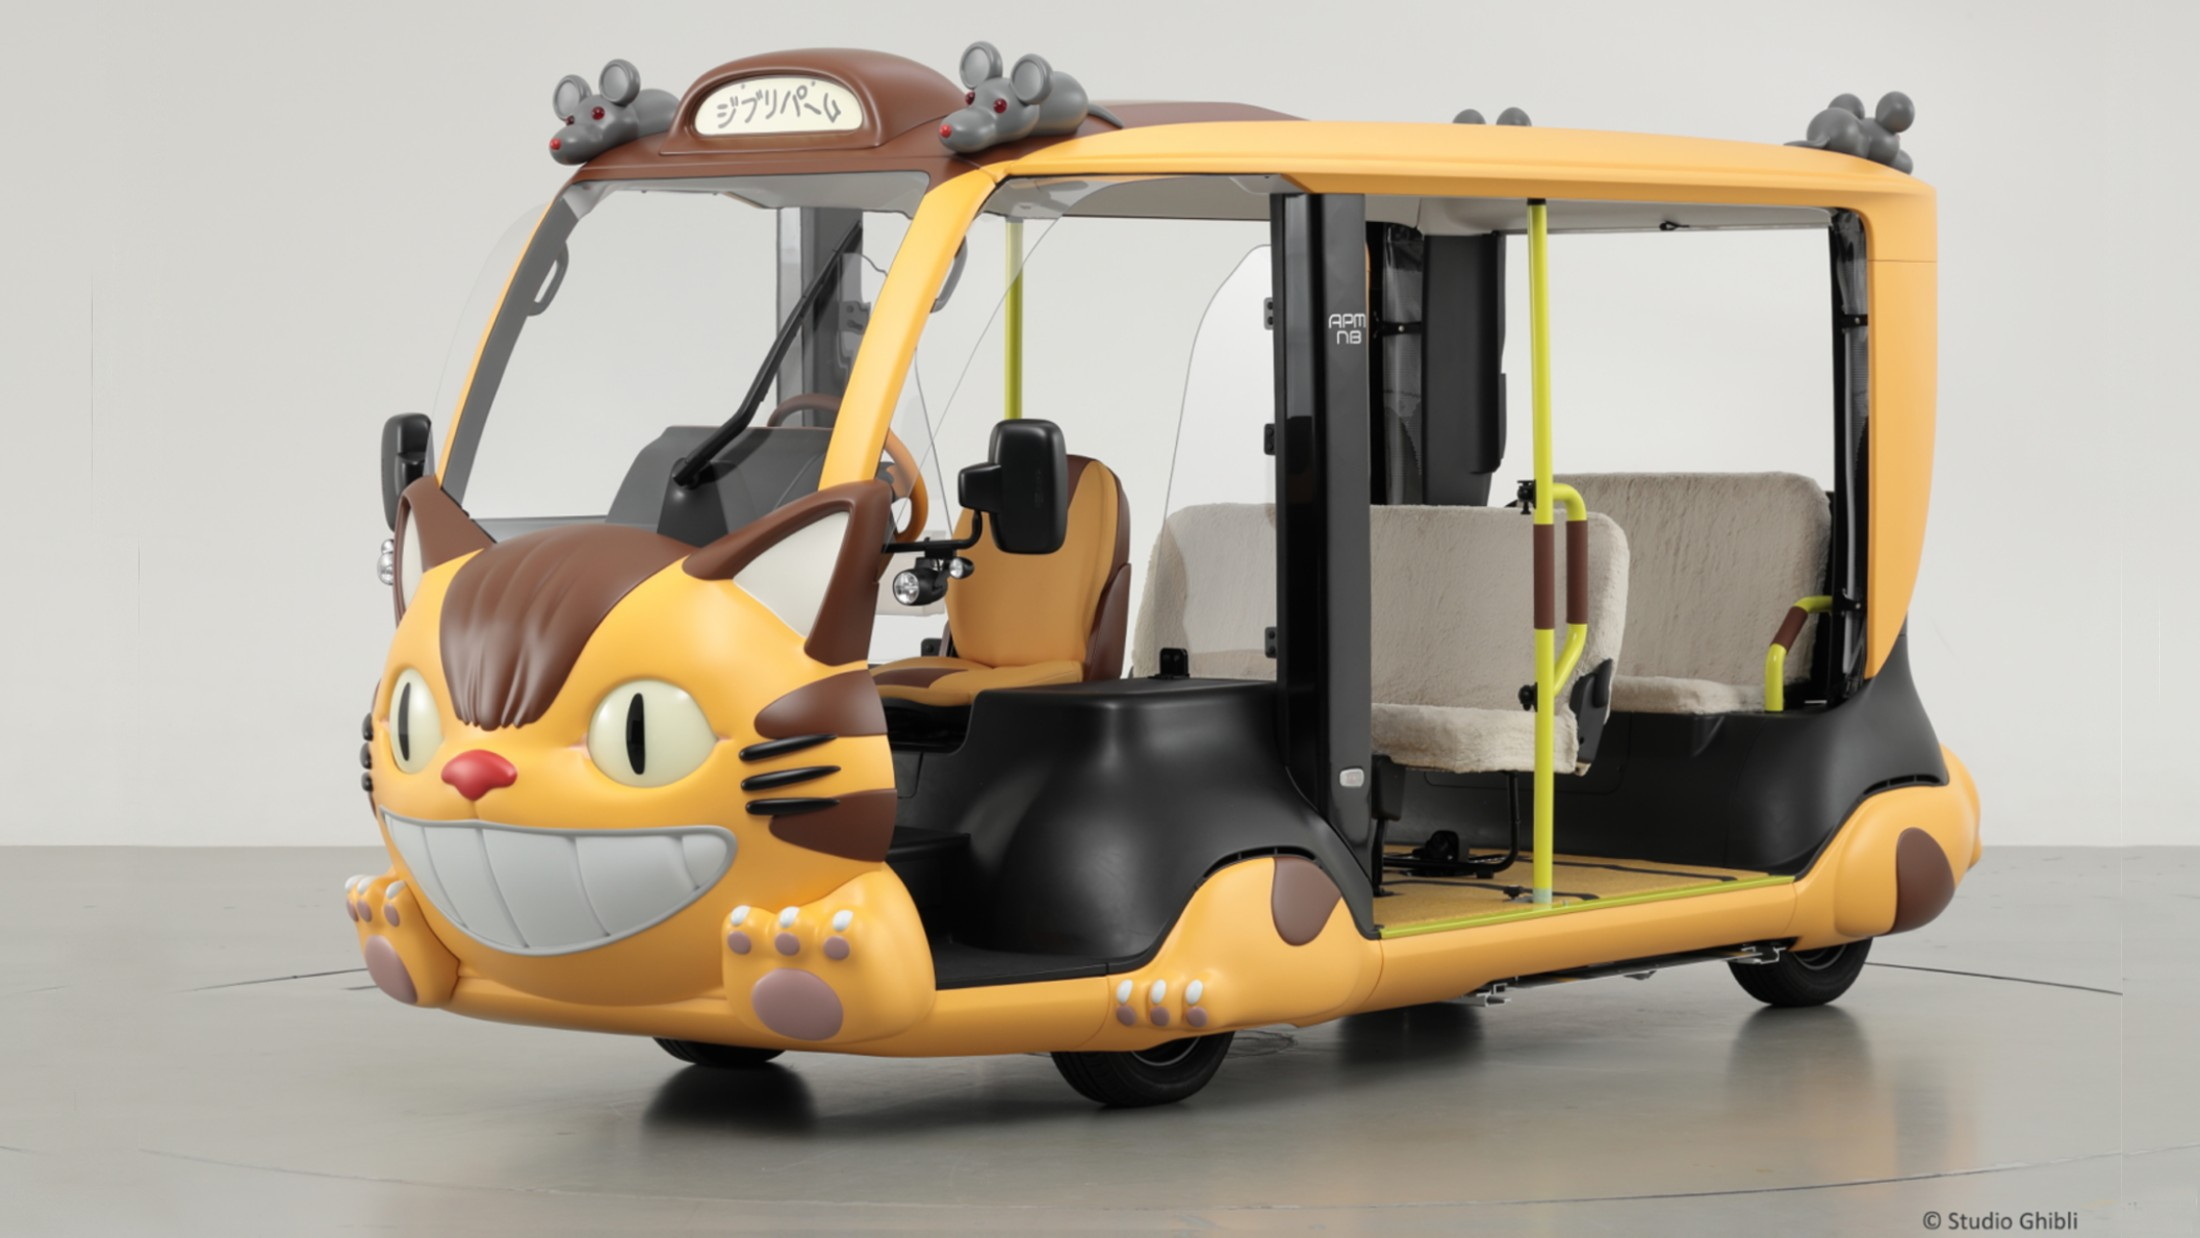 Toyota Transforms Electric Vehicle into Resemblance of Studio Ghibli's Catbus